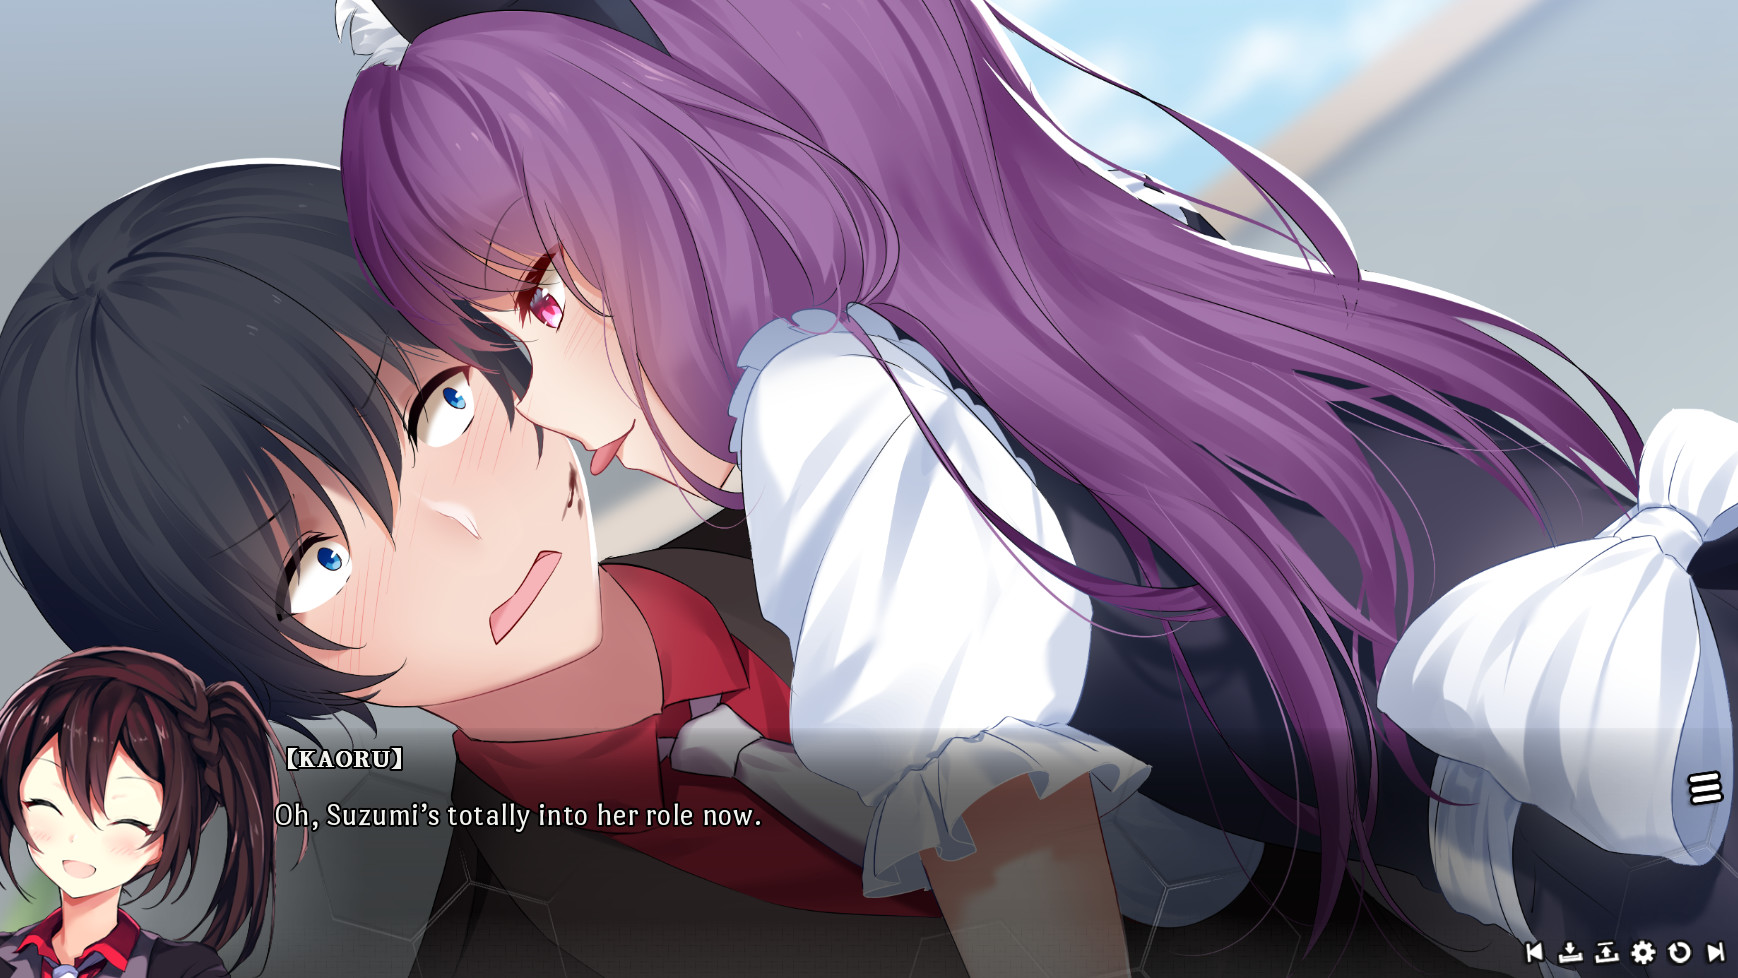 Bloody Chronicles - New Cycle of Death Visual Novel Free Download